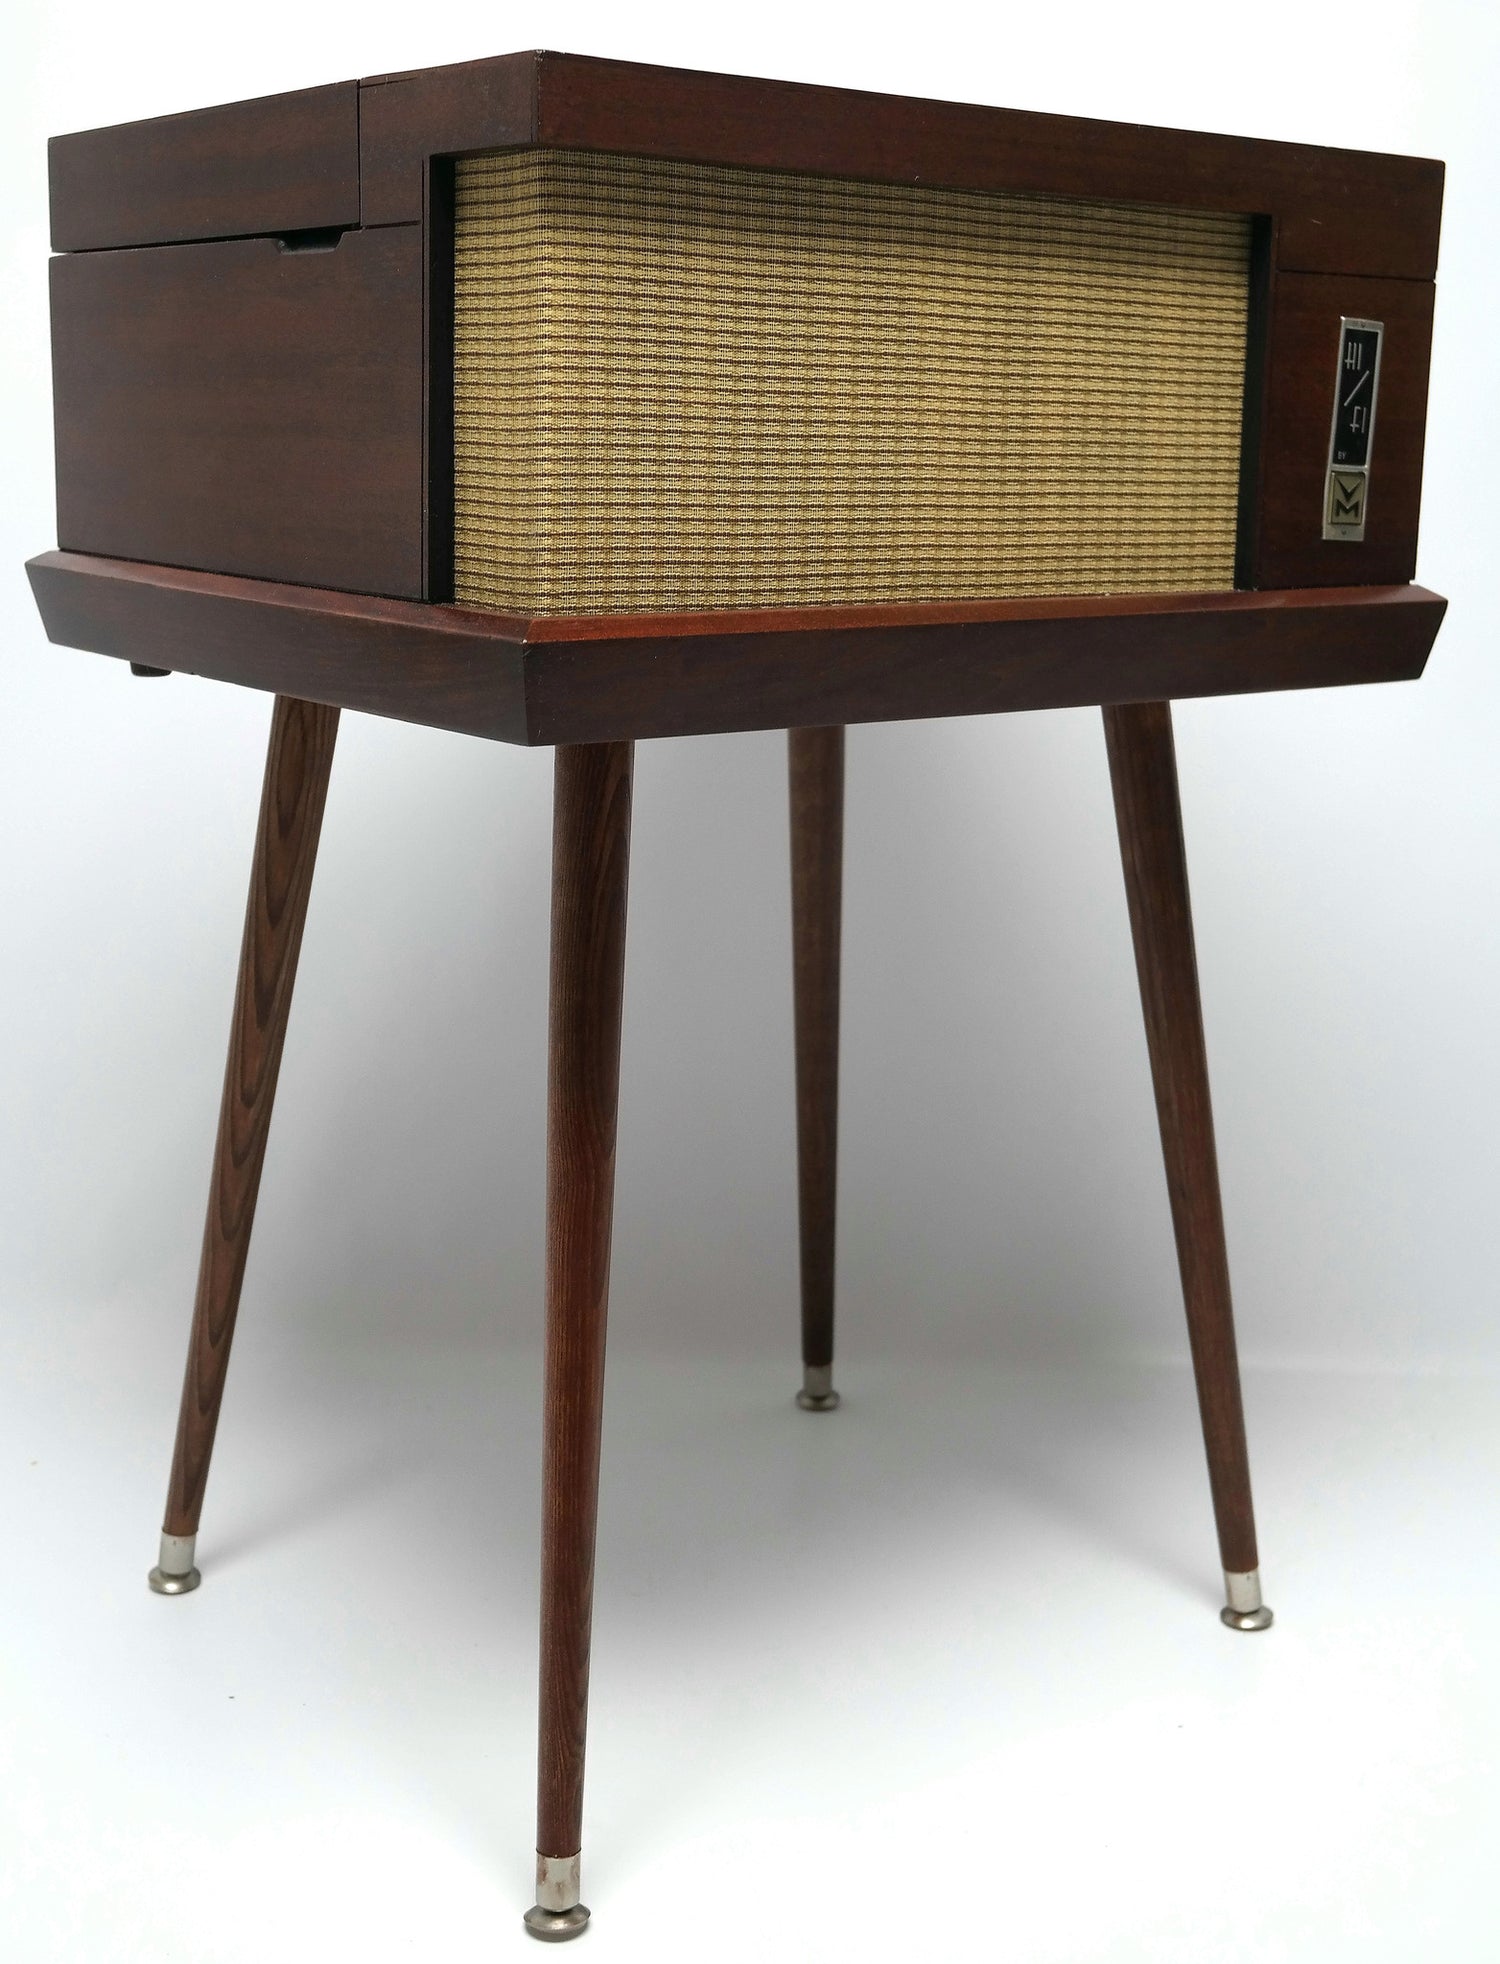 MCM STEREO - 50's - Mid Century Modern Stereo Consolette Voice of Music Record Player Bluetooth The Vintedge Co.